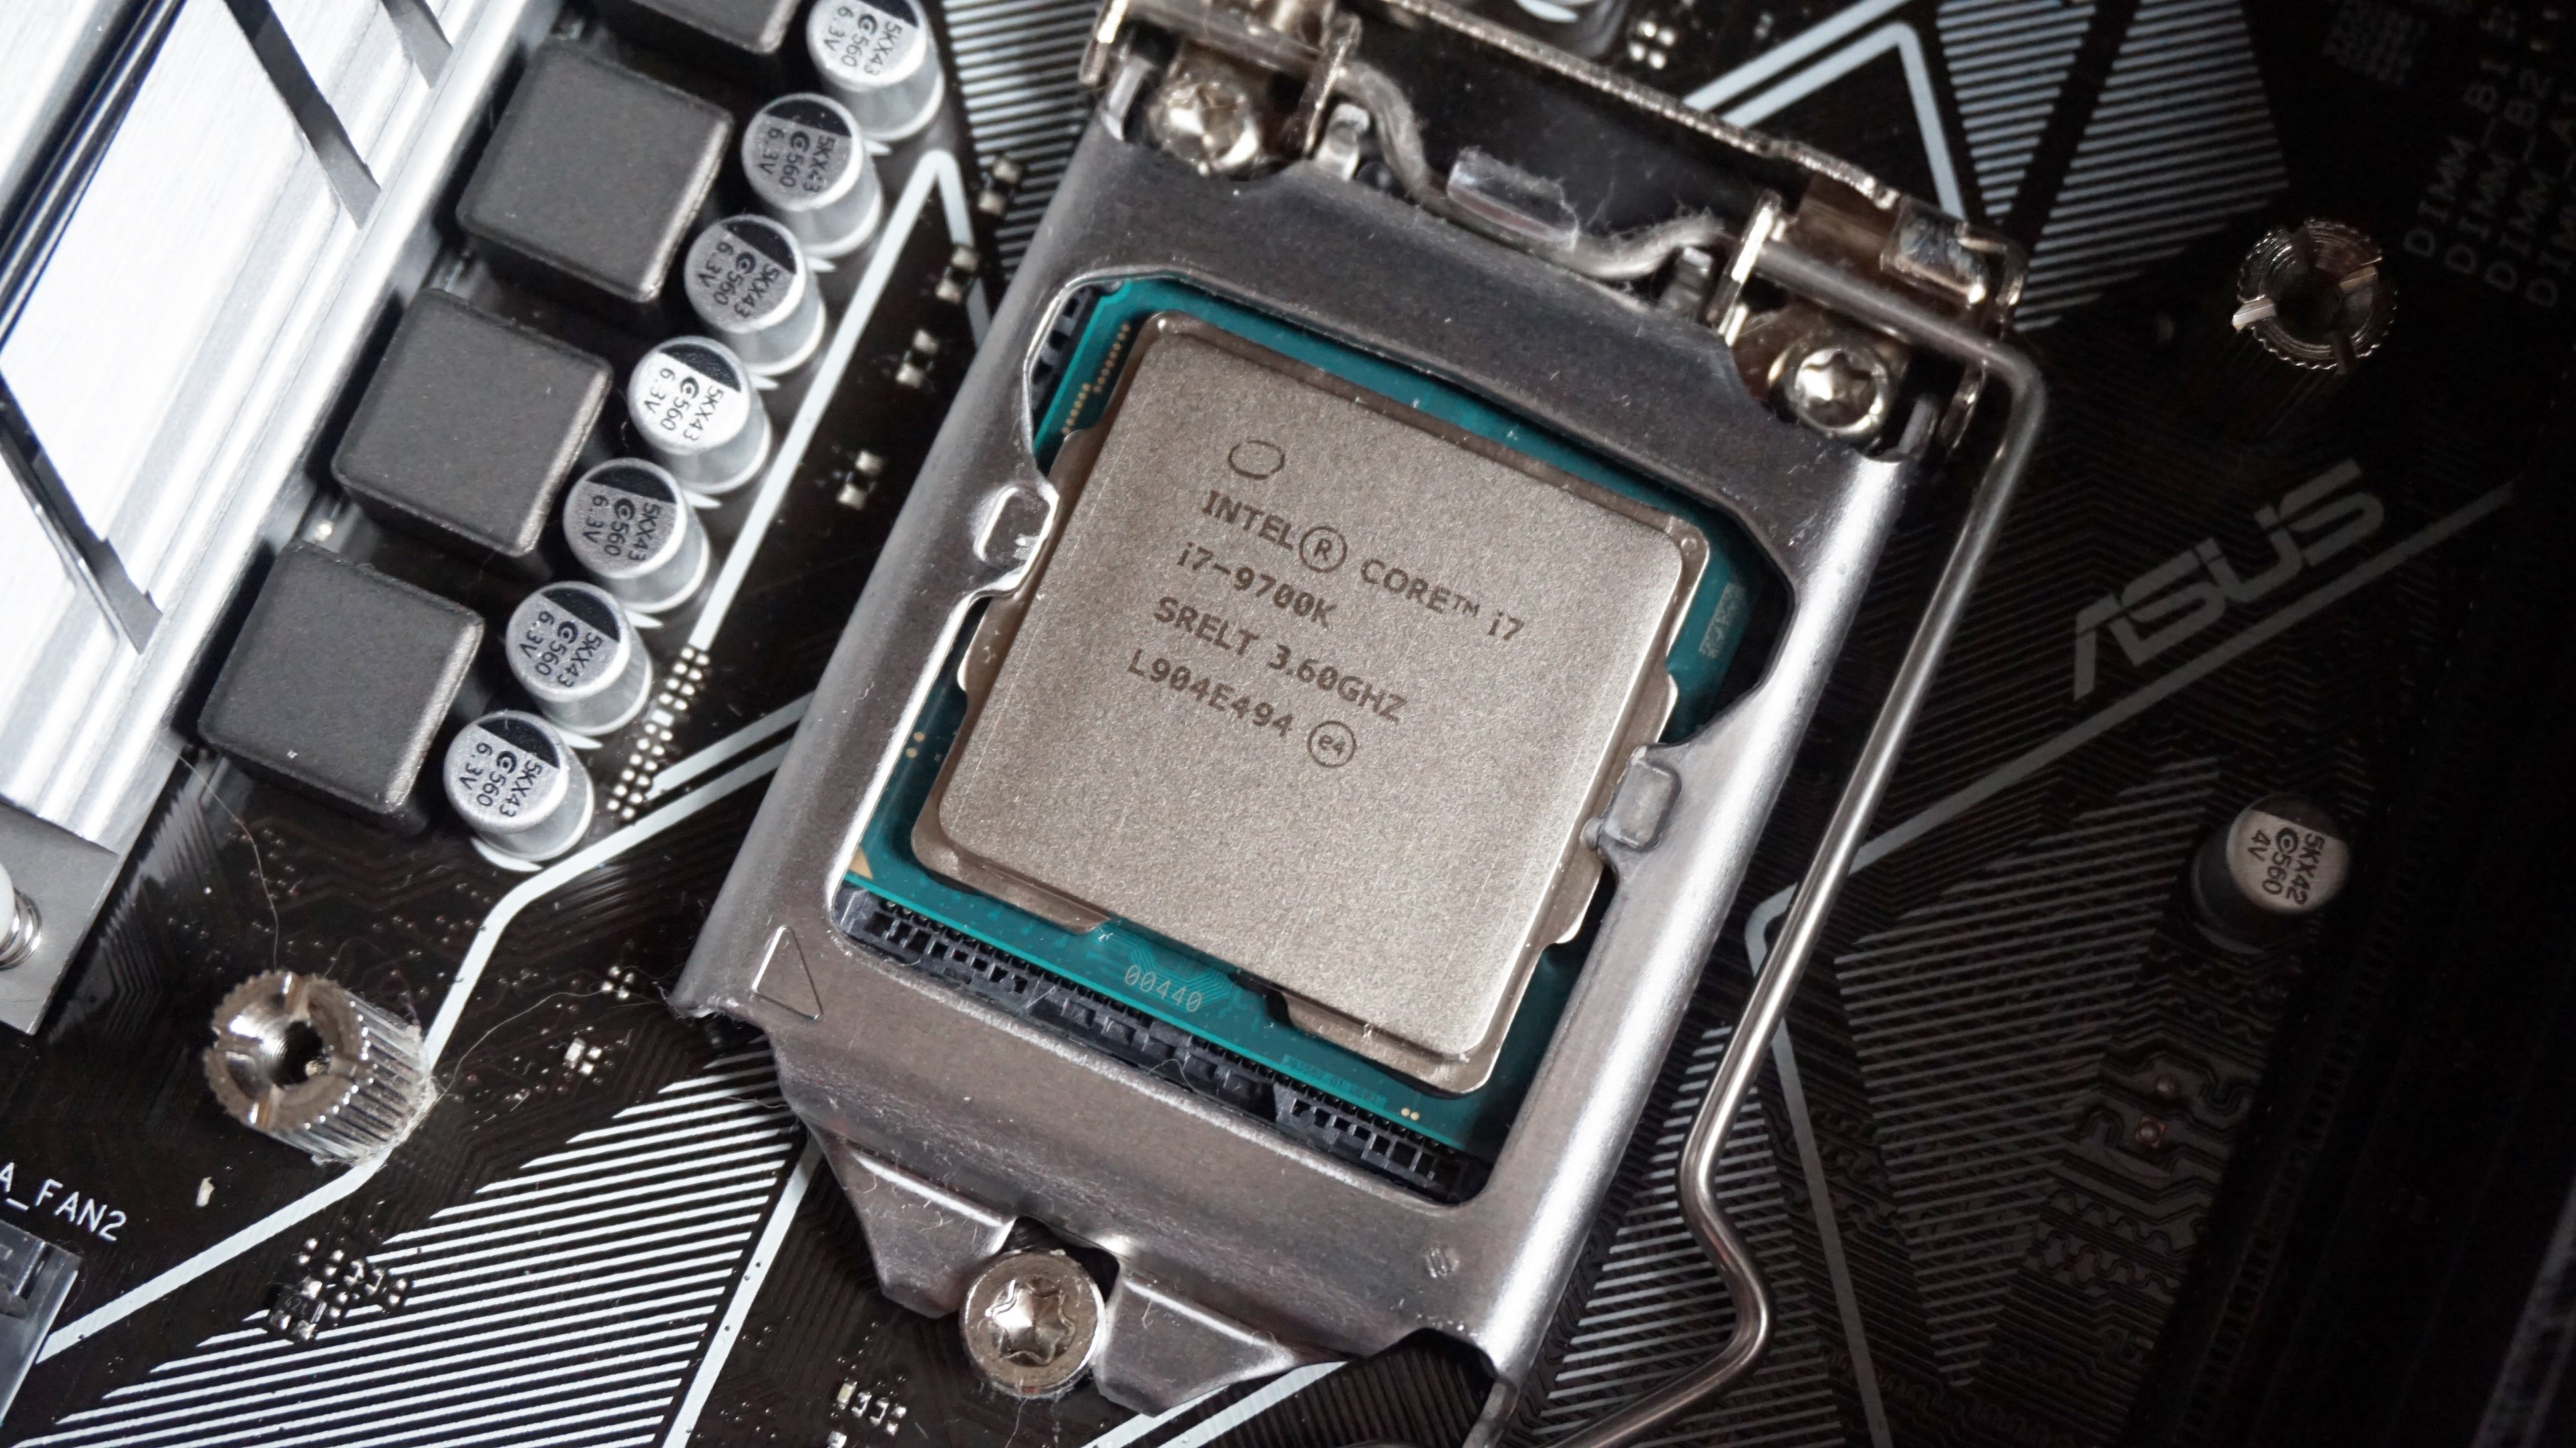 Intel Core i7-9700K review: The best gaming CPU that doesn't break the